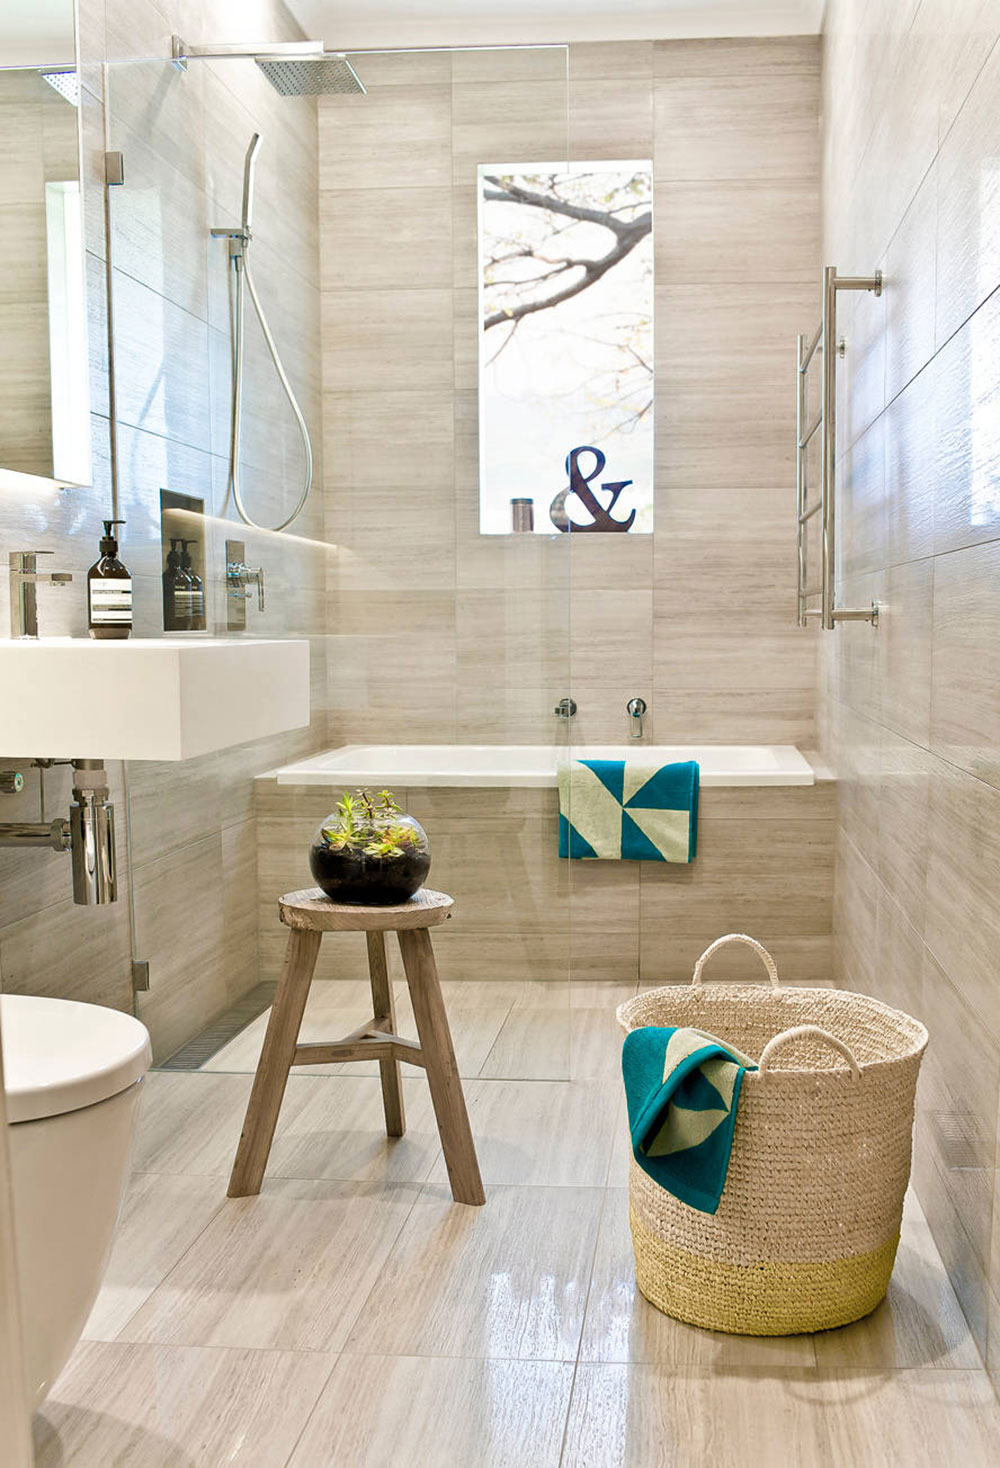 Tim-Ditchfield-Architects-by-GIA-Bathrooms-Kitchens Where to hang wet towels in a small bathroom